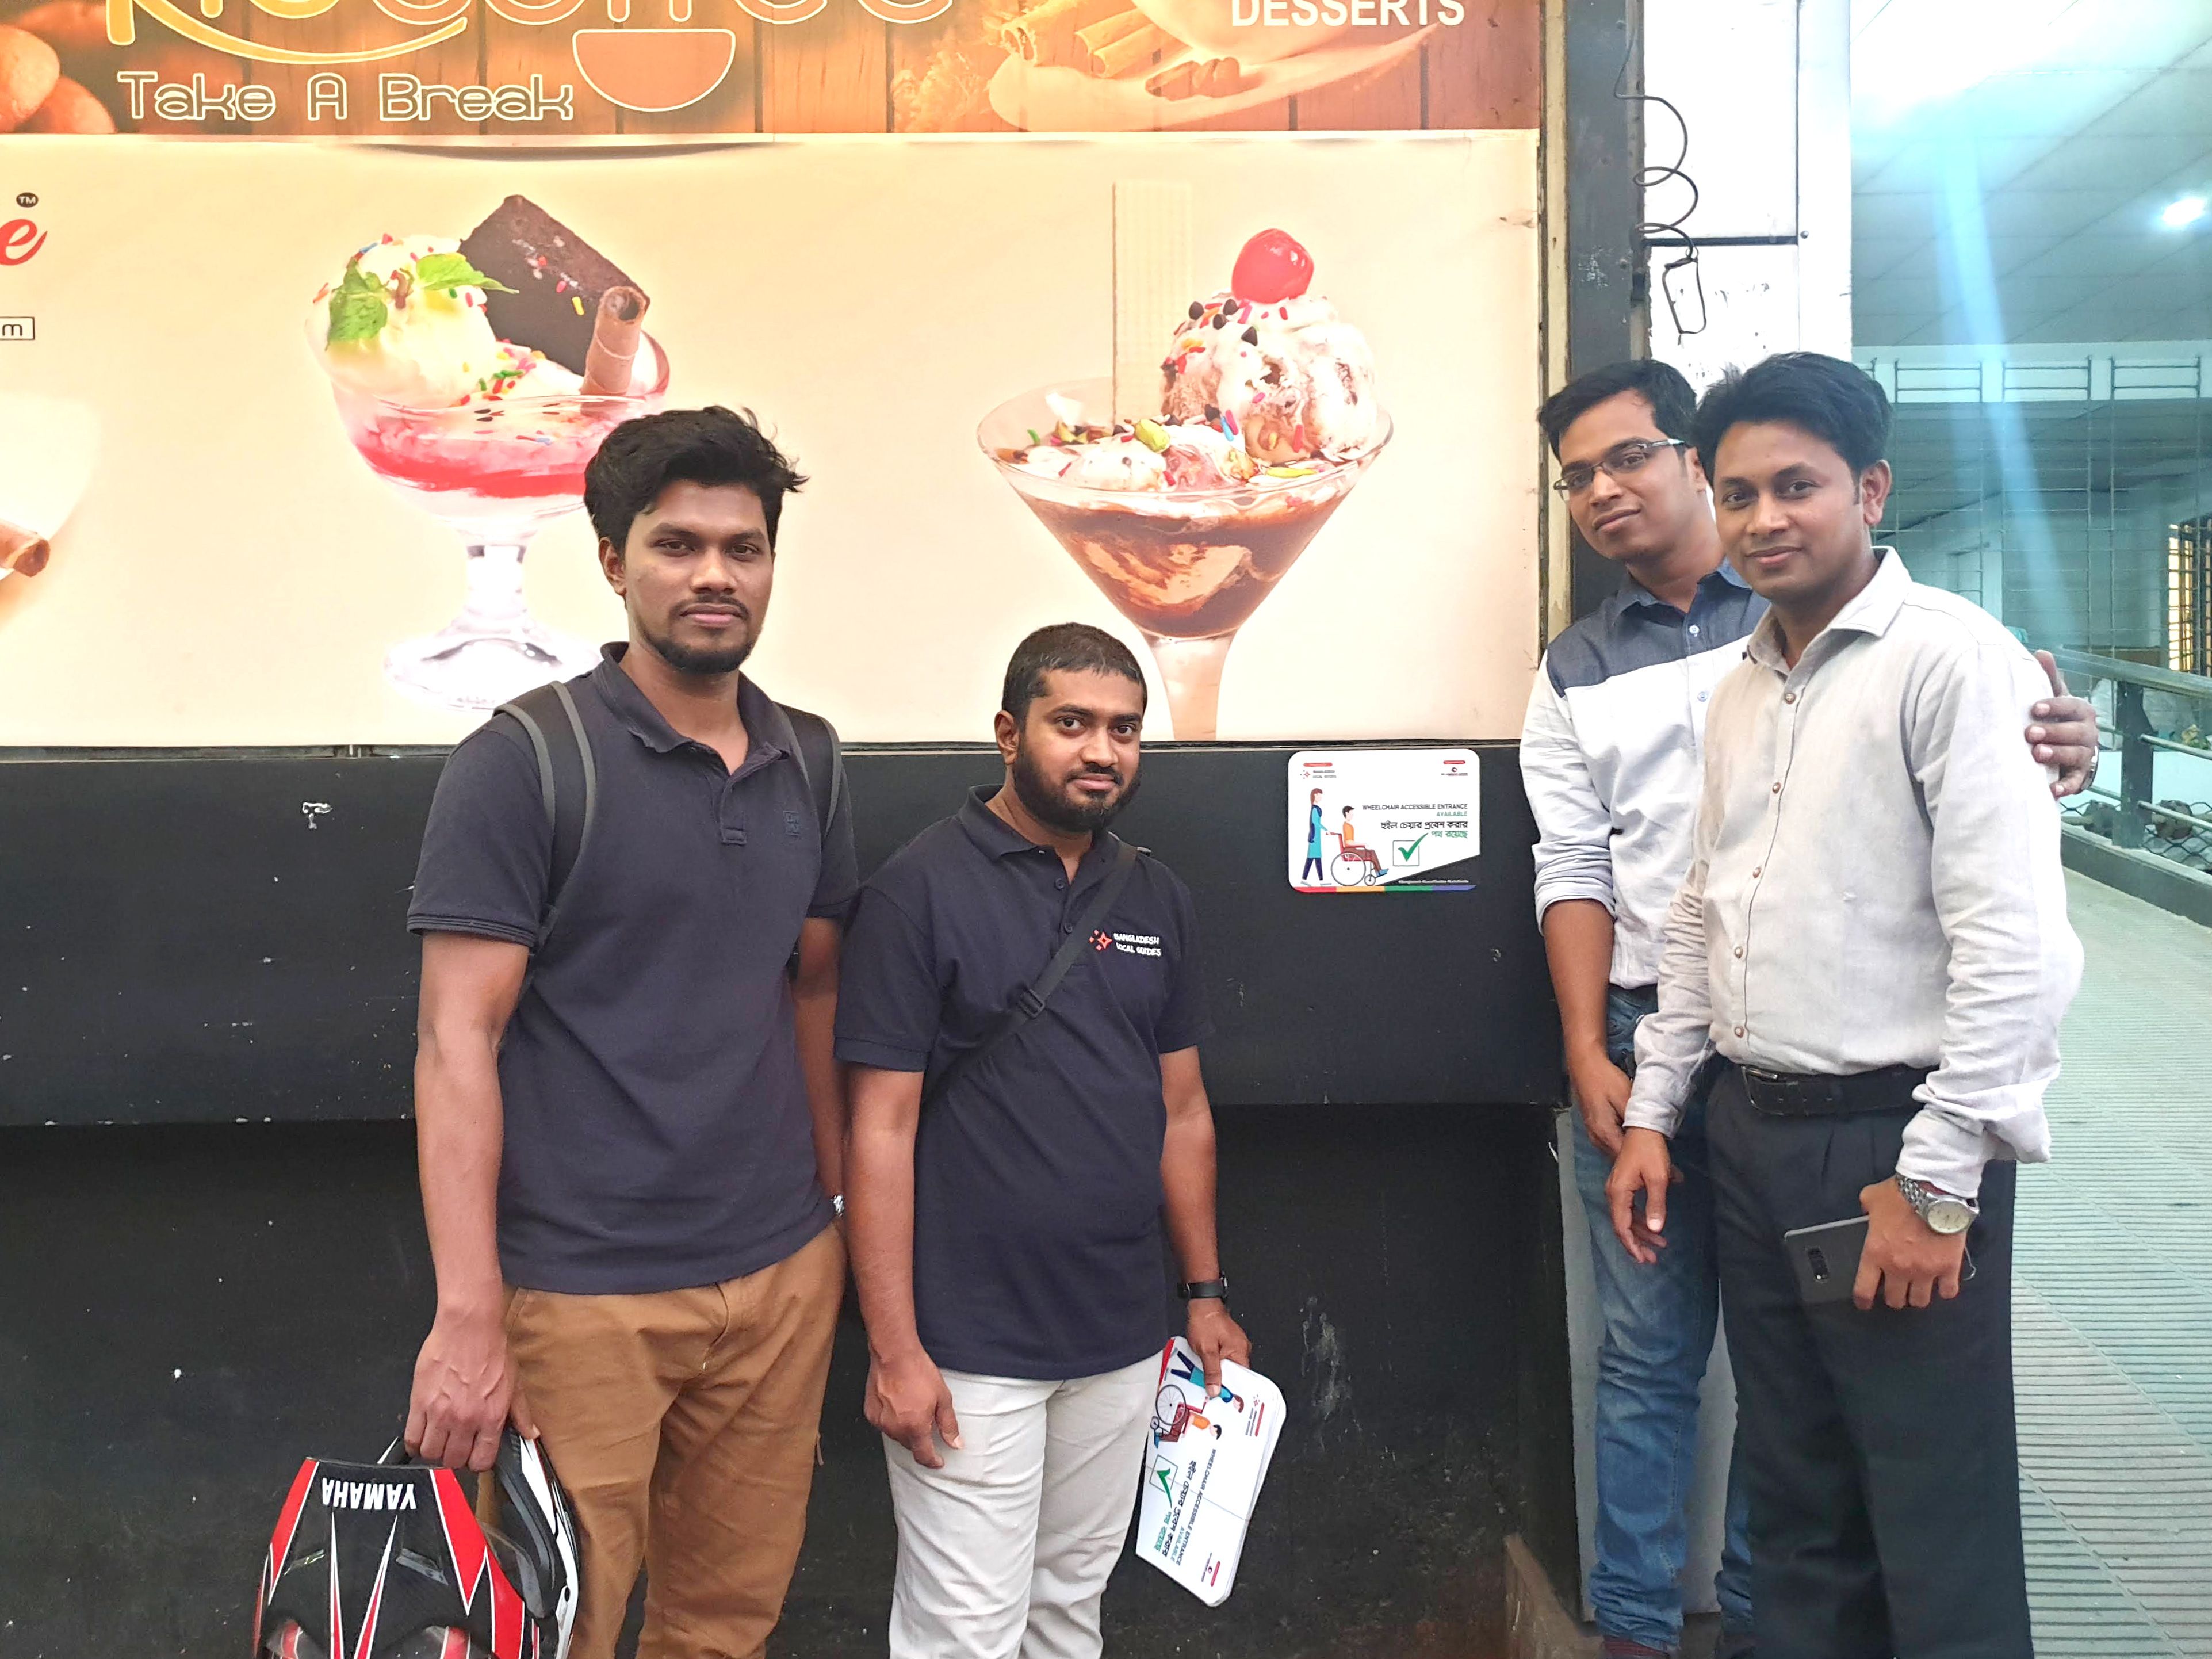 After Evening We Visit Lot's Of Restaurant, Food Corner For Checking Accessibility Few of Them Have Accessibility And Other Don't Have. So We Explain About Necessity of This Accessibility Then They Understand and Committed to Make Accessibility Soon.